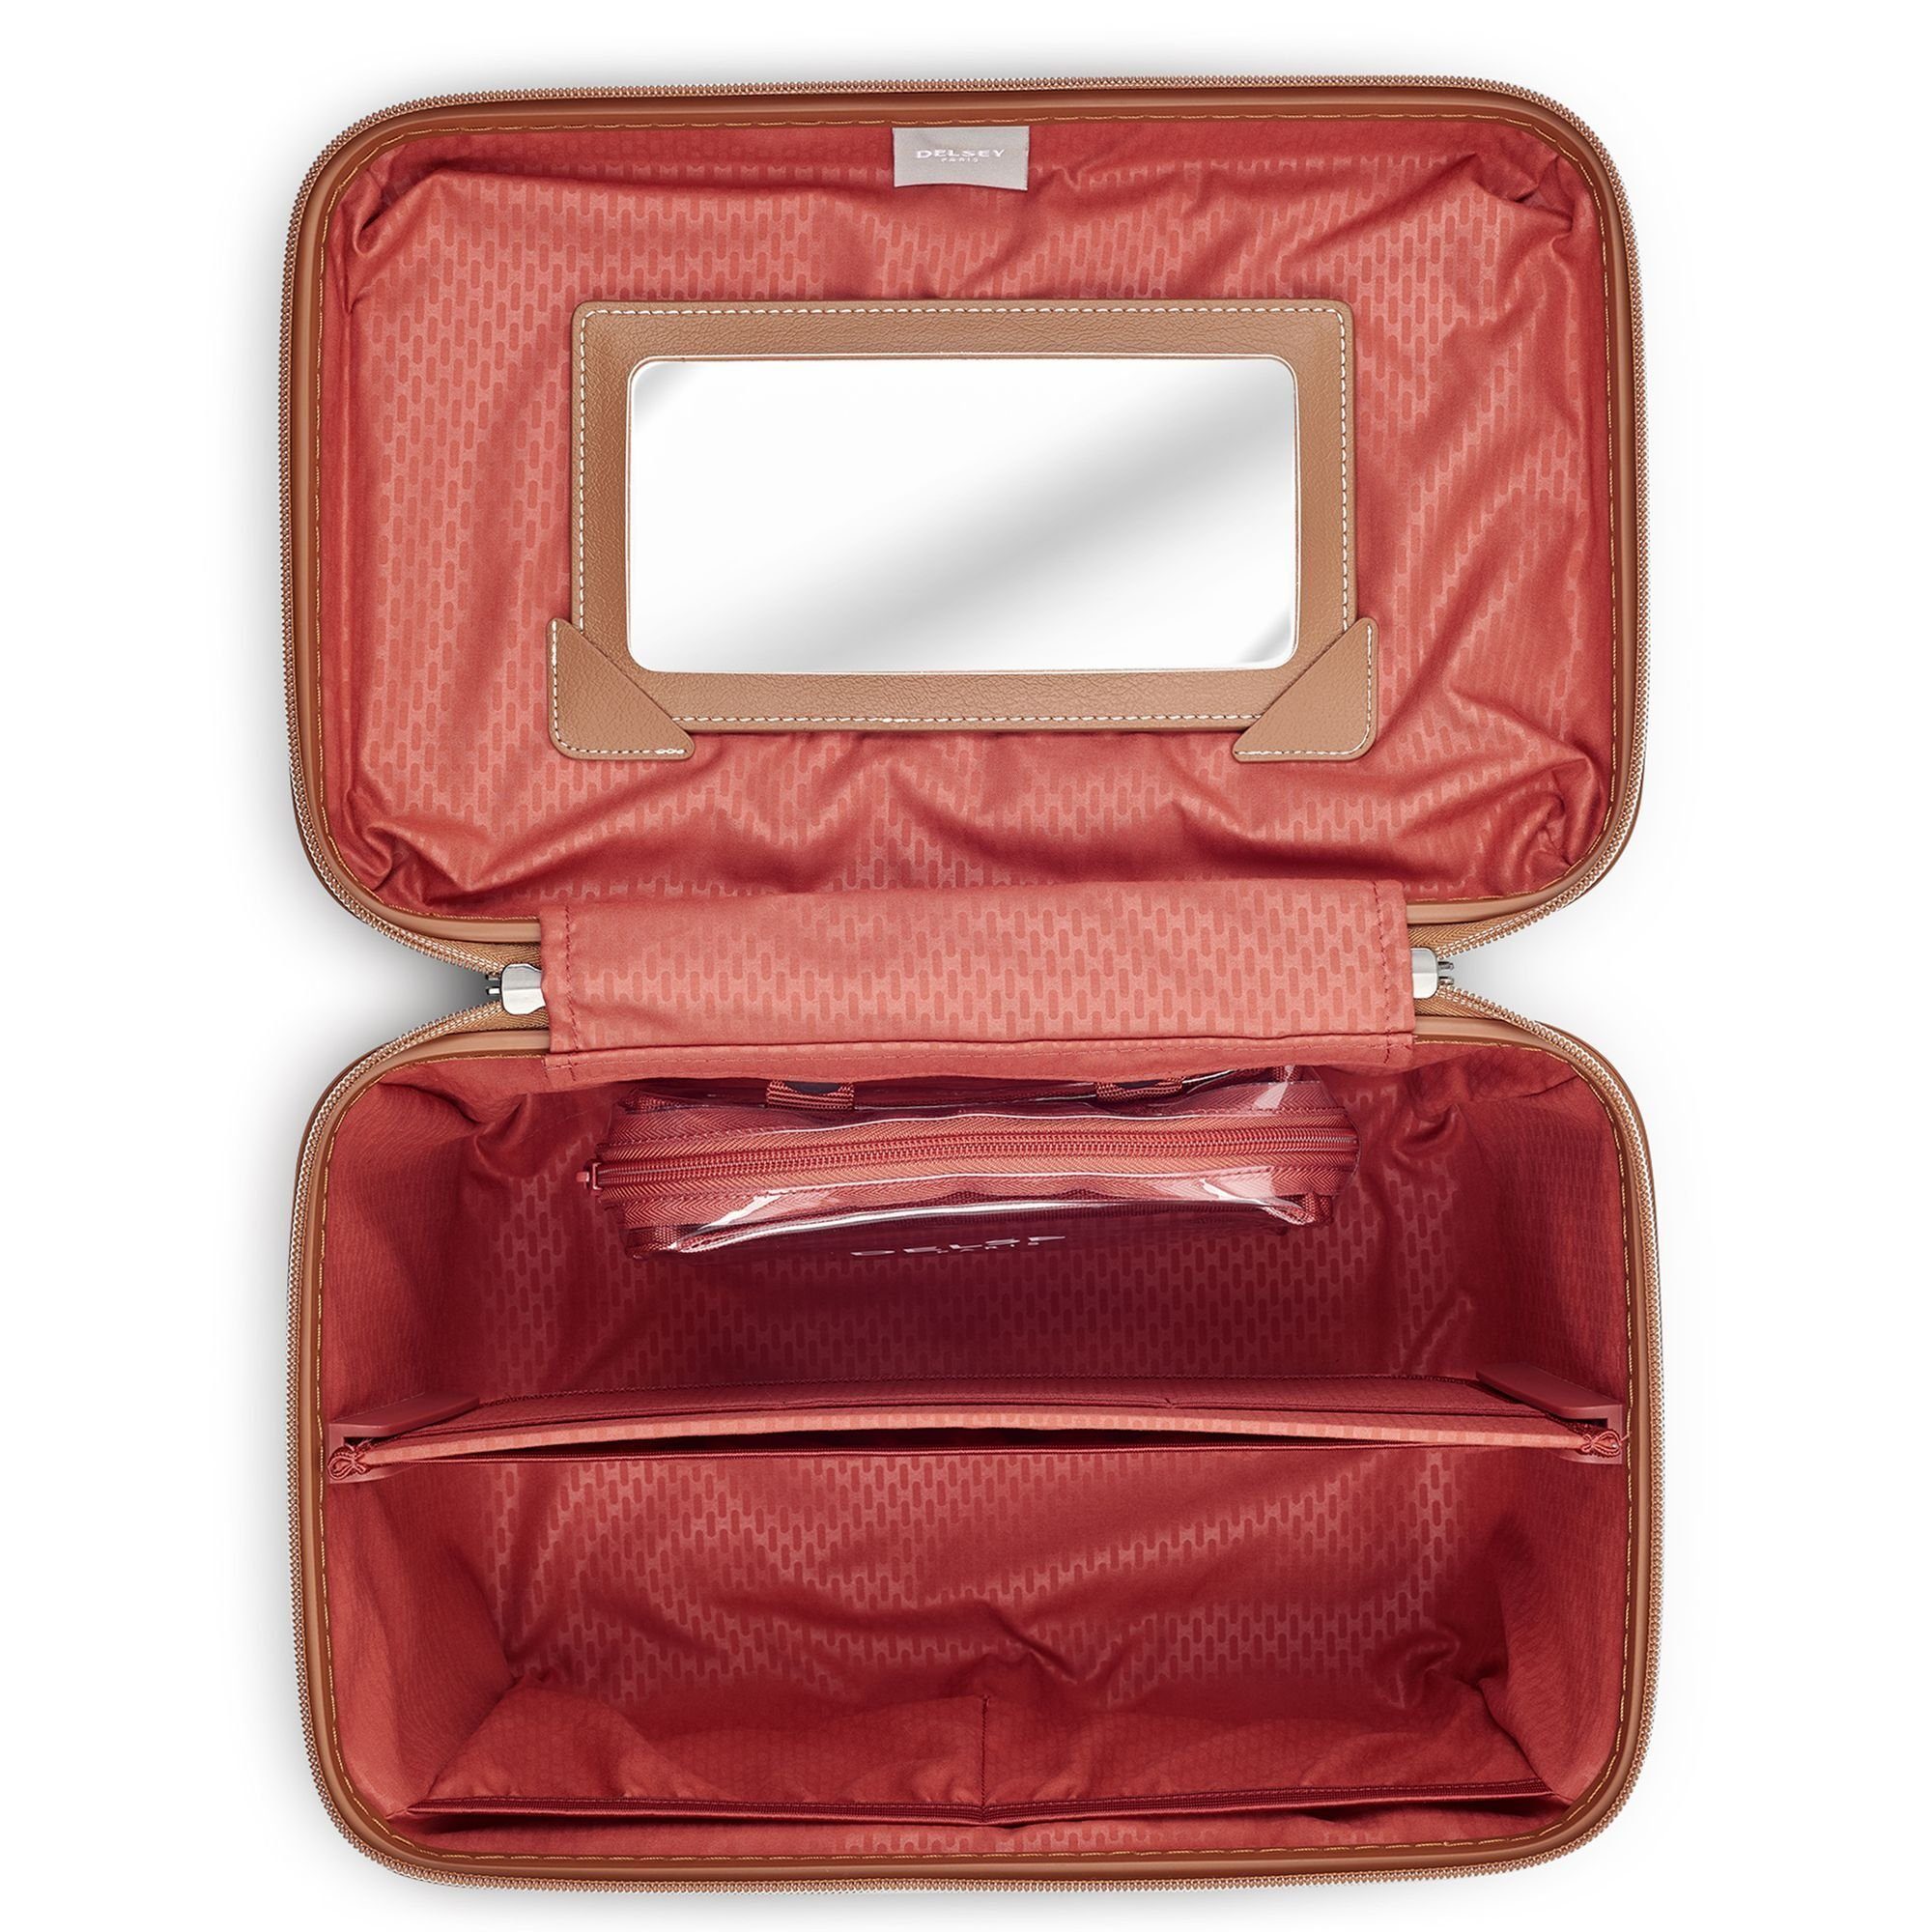 Chatelet Air angora Polycarbonat 2.0, Beautycase Delsey